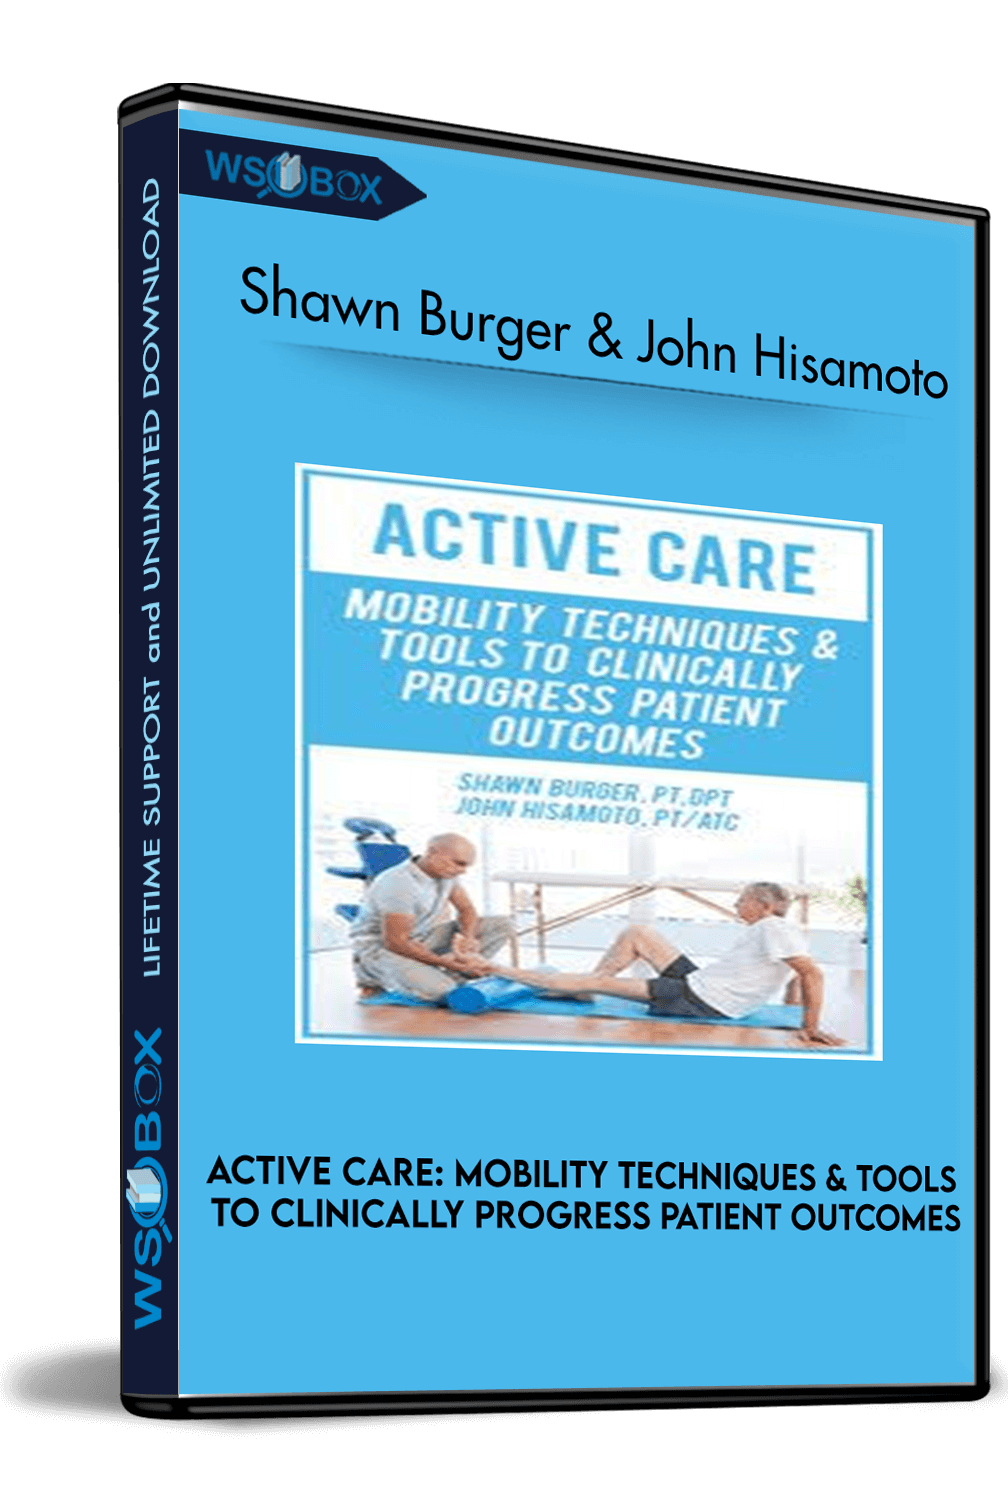 active-care-mobility-techniques-tools-to-clinically-progress-patient-outcomes-shawn-burger-john-hisamoto